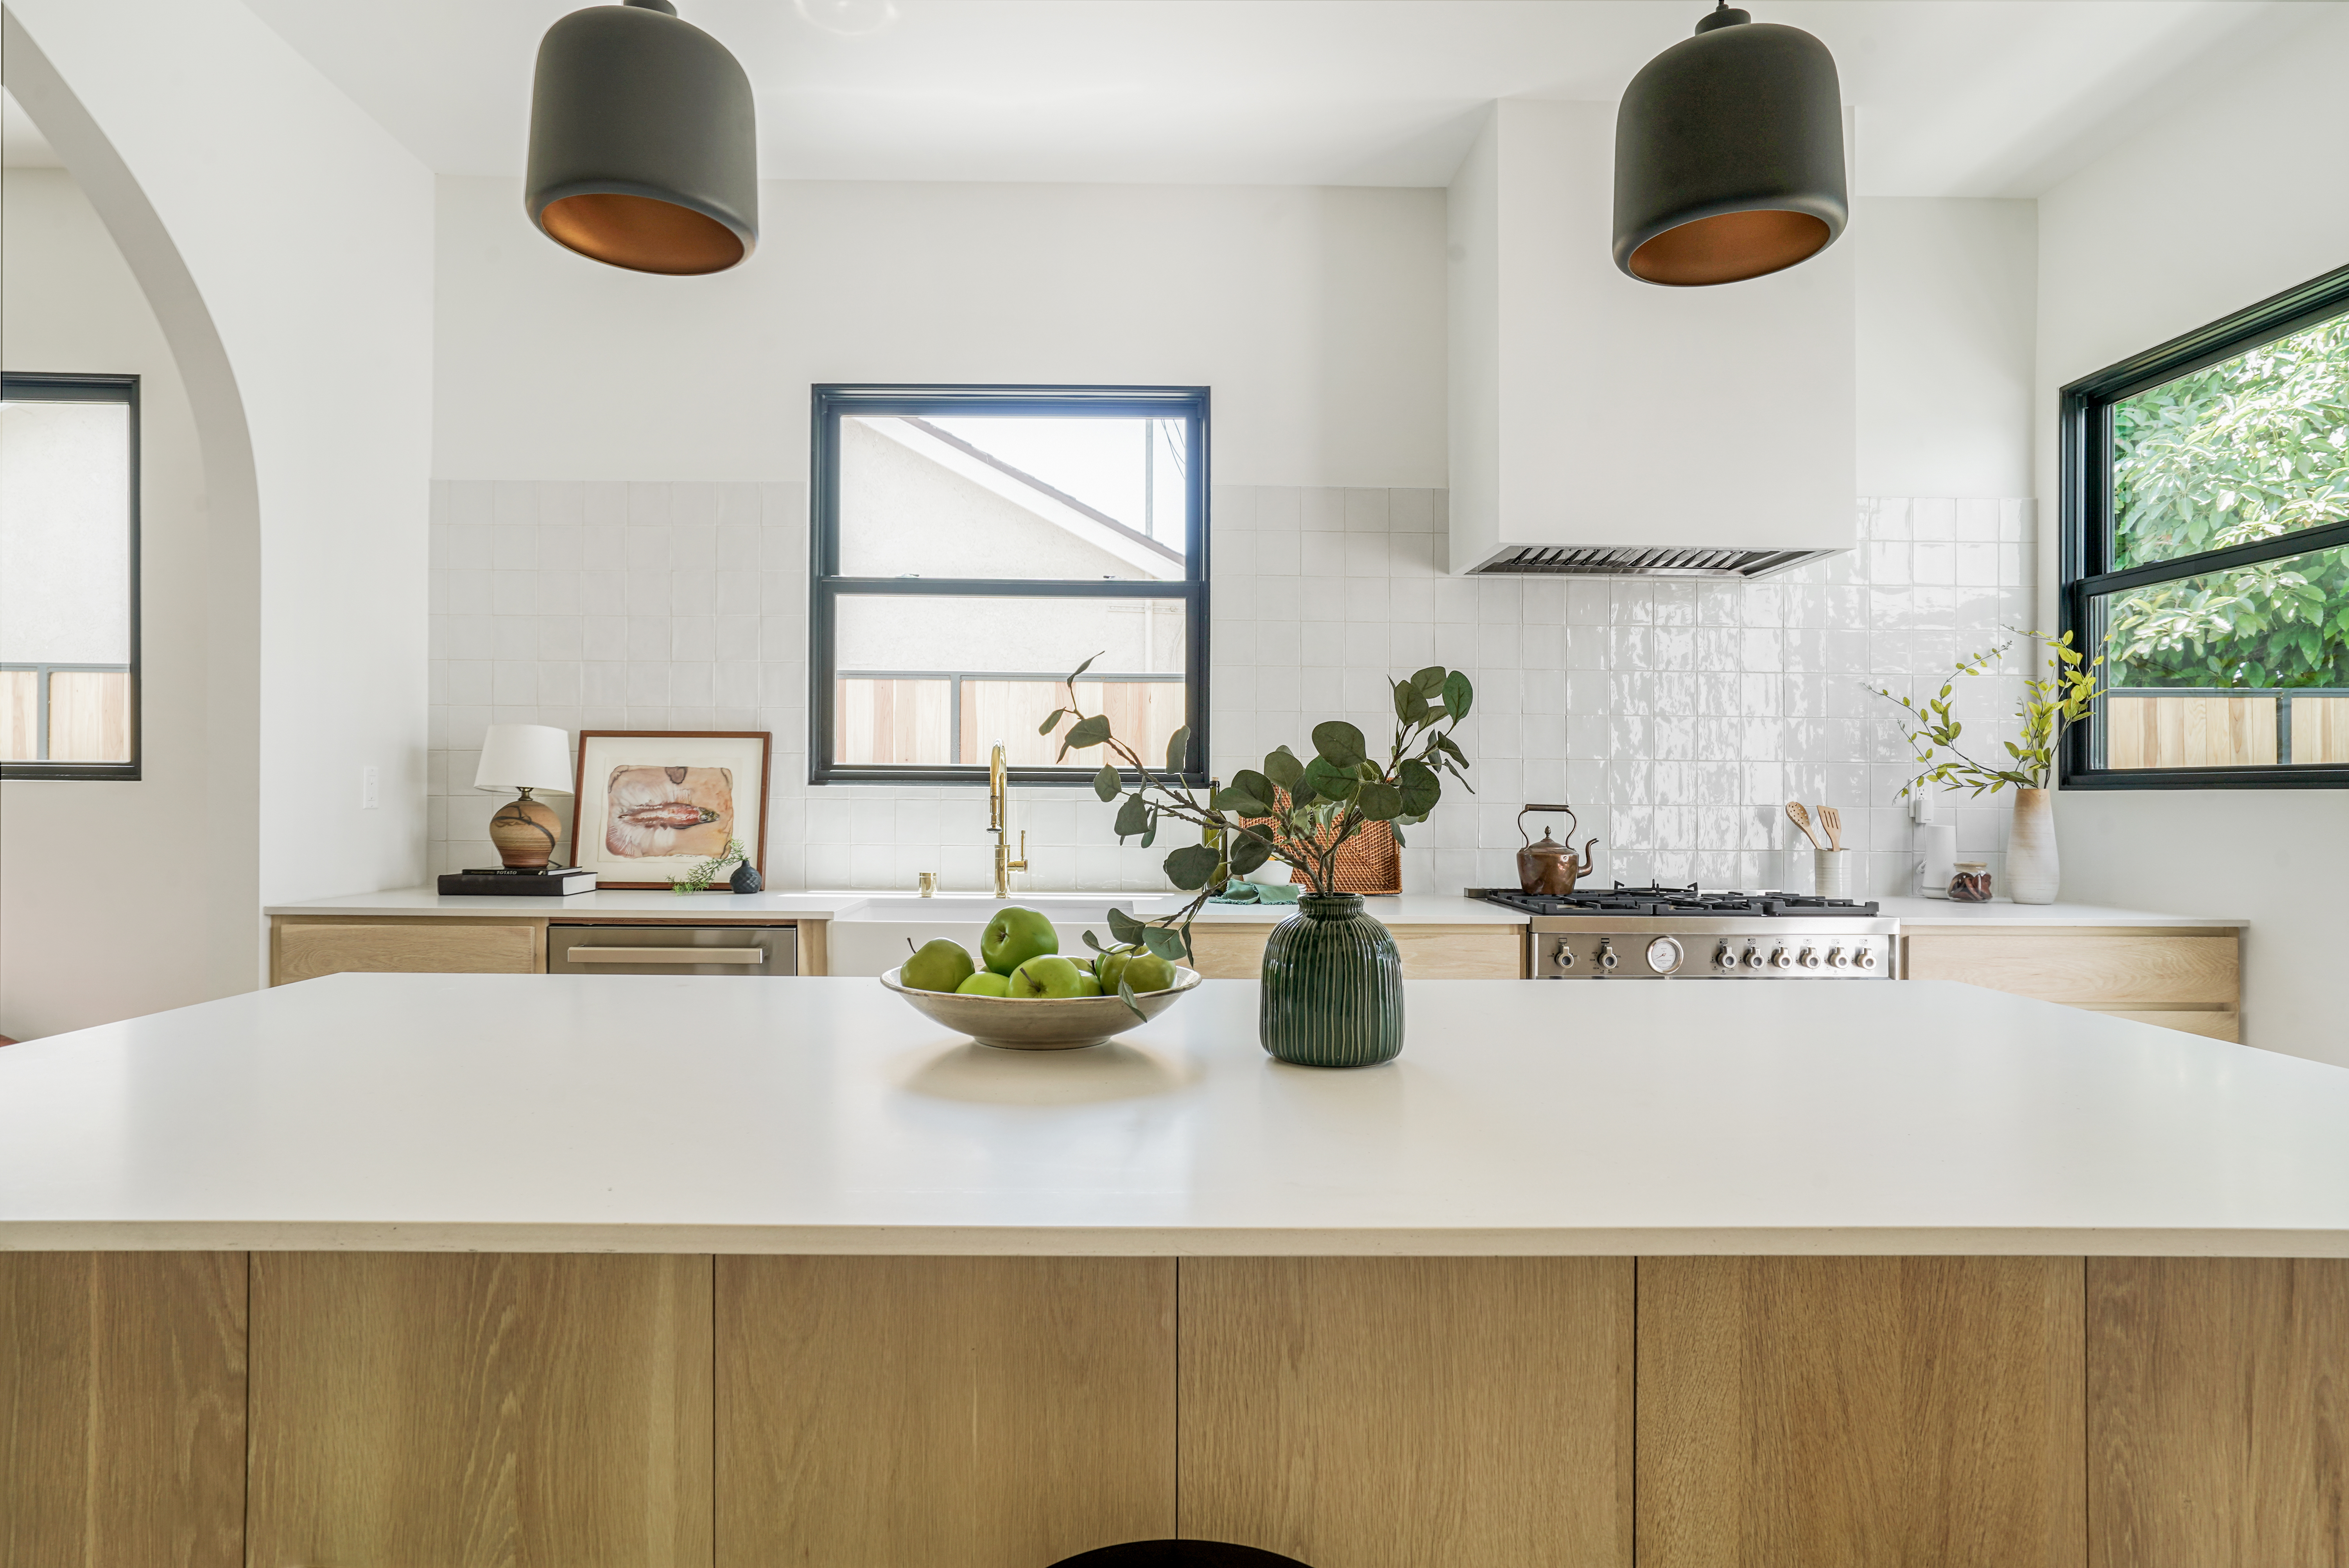 Ælte smog Æsel These Kitchen Lamp Ideas Will Make Your Countertops Glow | Hunker